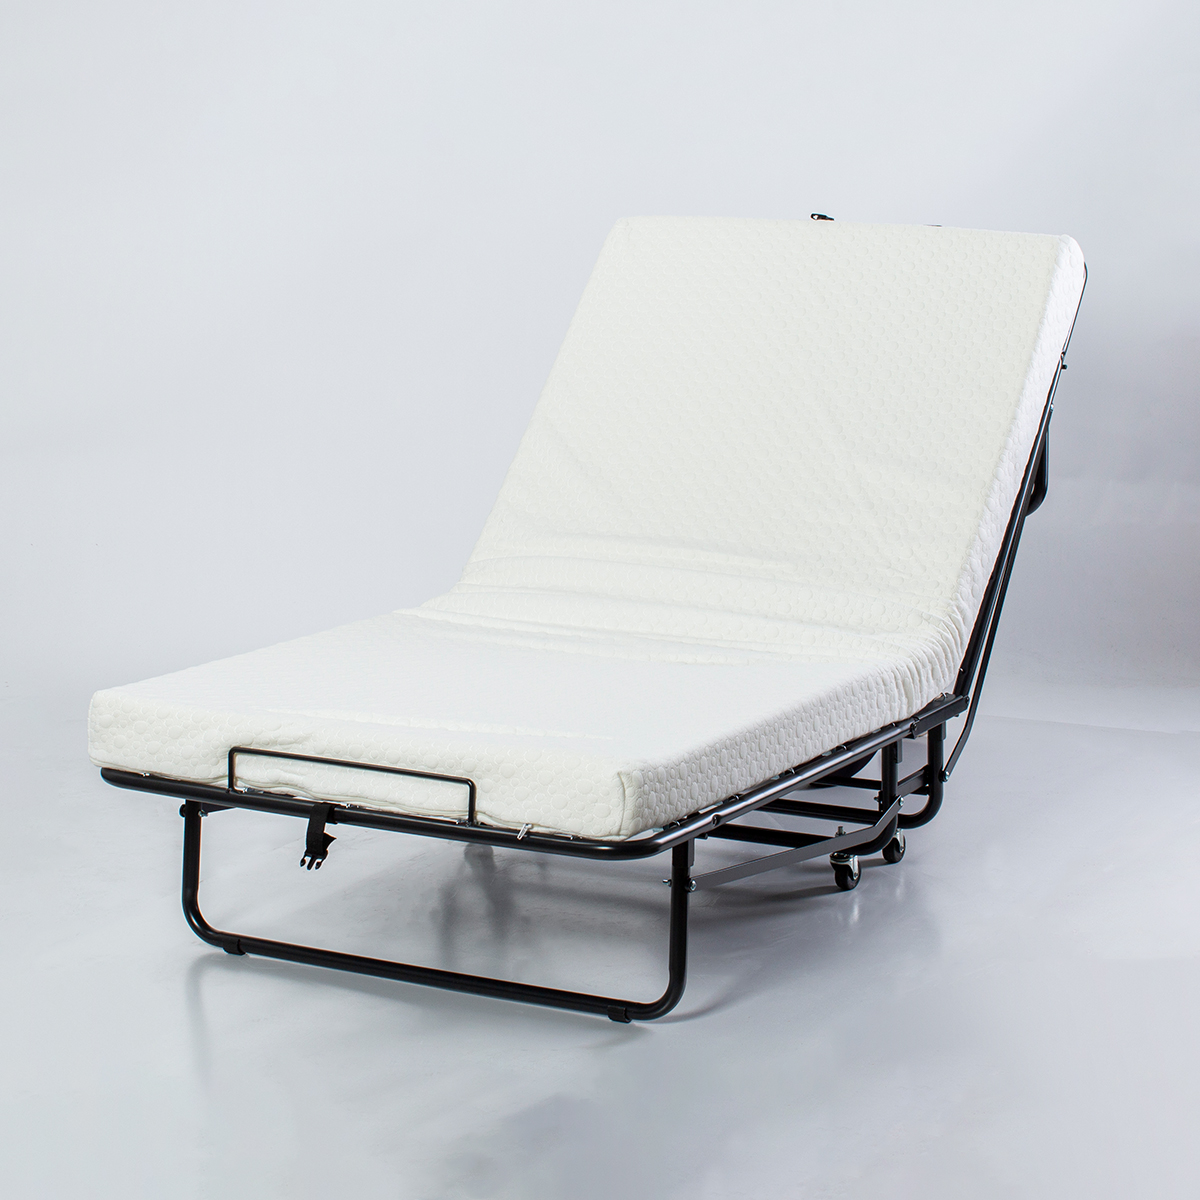 Image of Makers Solo Folding Rollaway Bed - Standard Single